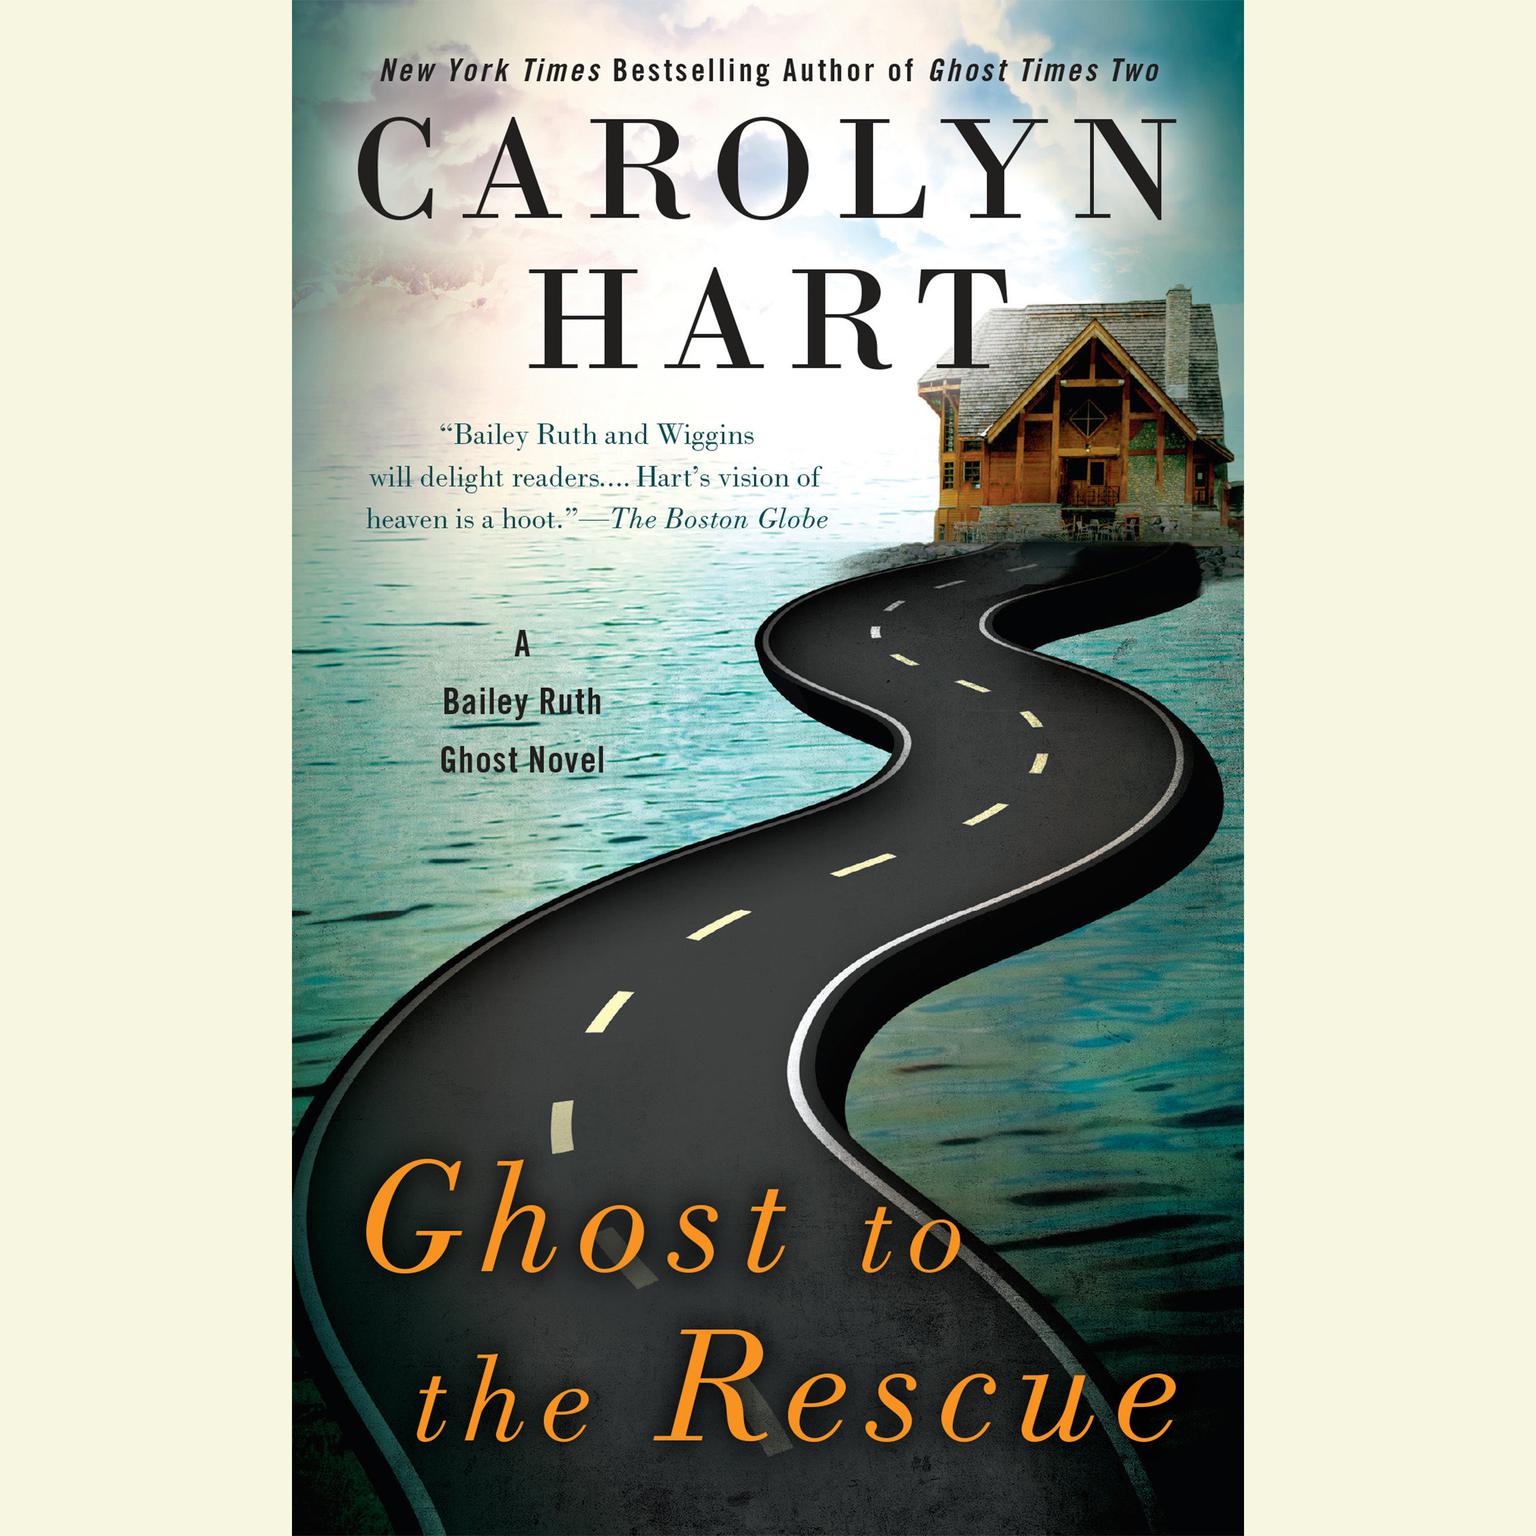 Ghost to the Rescue: A Bailey Ruth Ghost Novel Audiobook, by Carolyn Hart